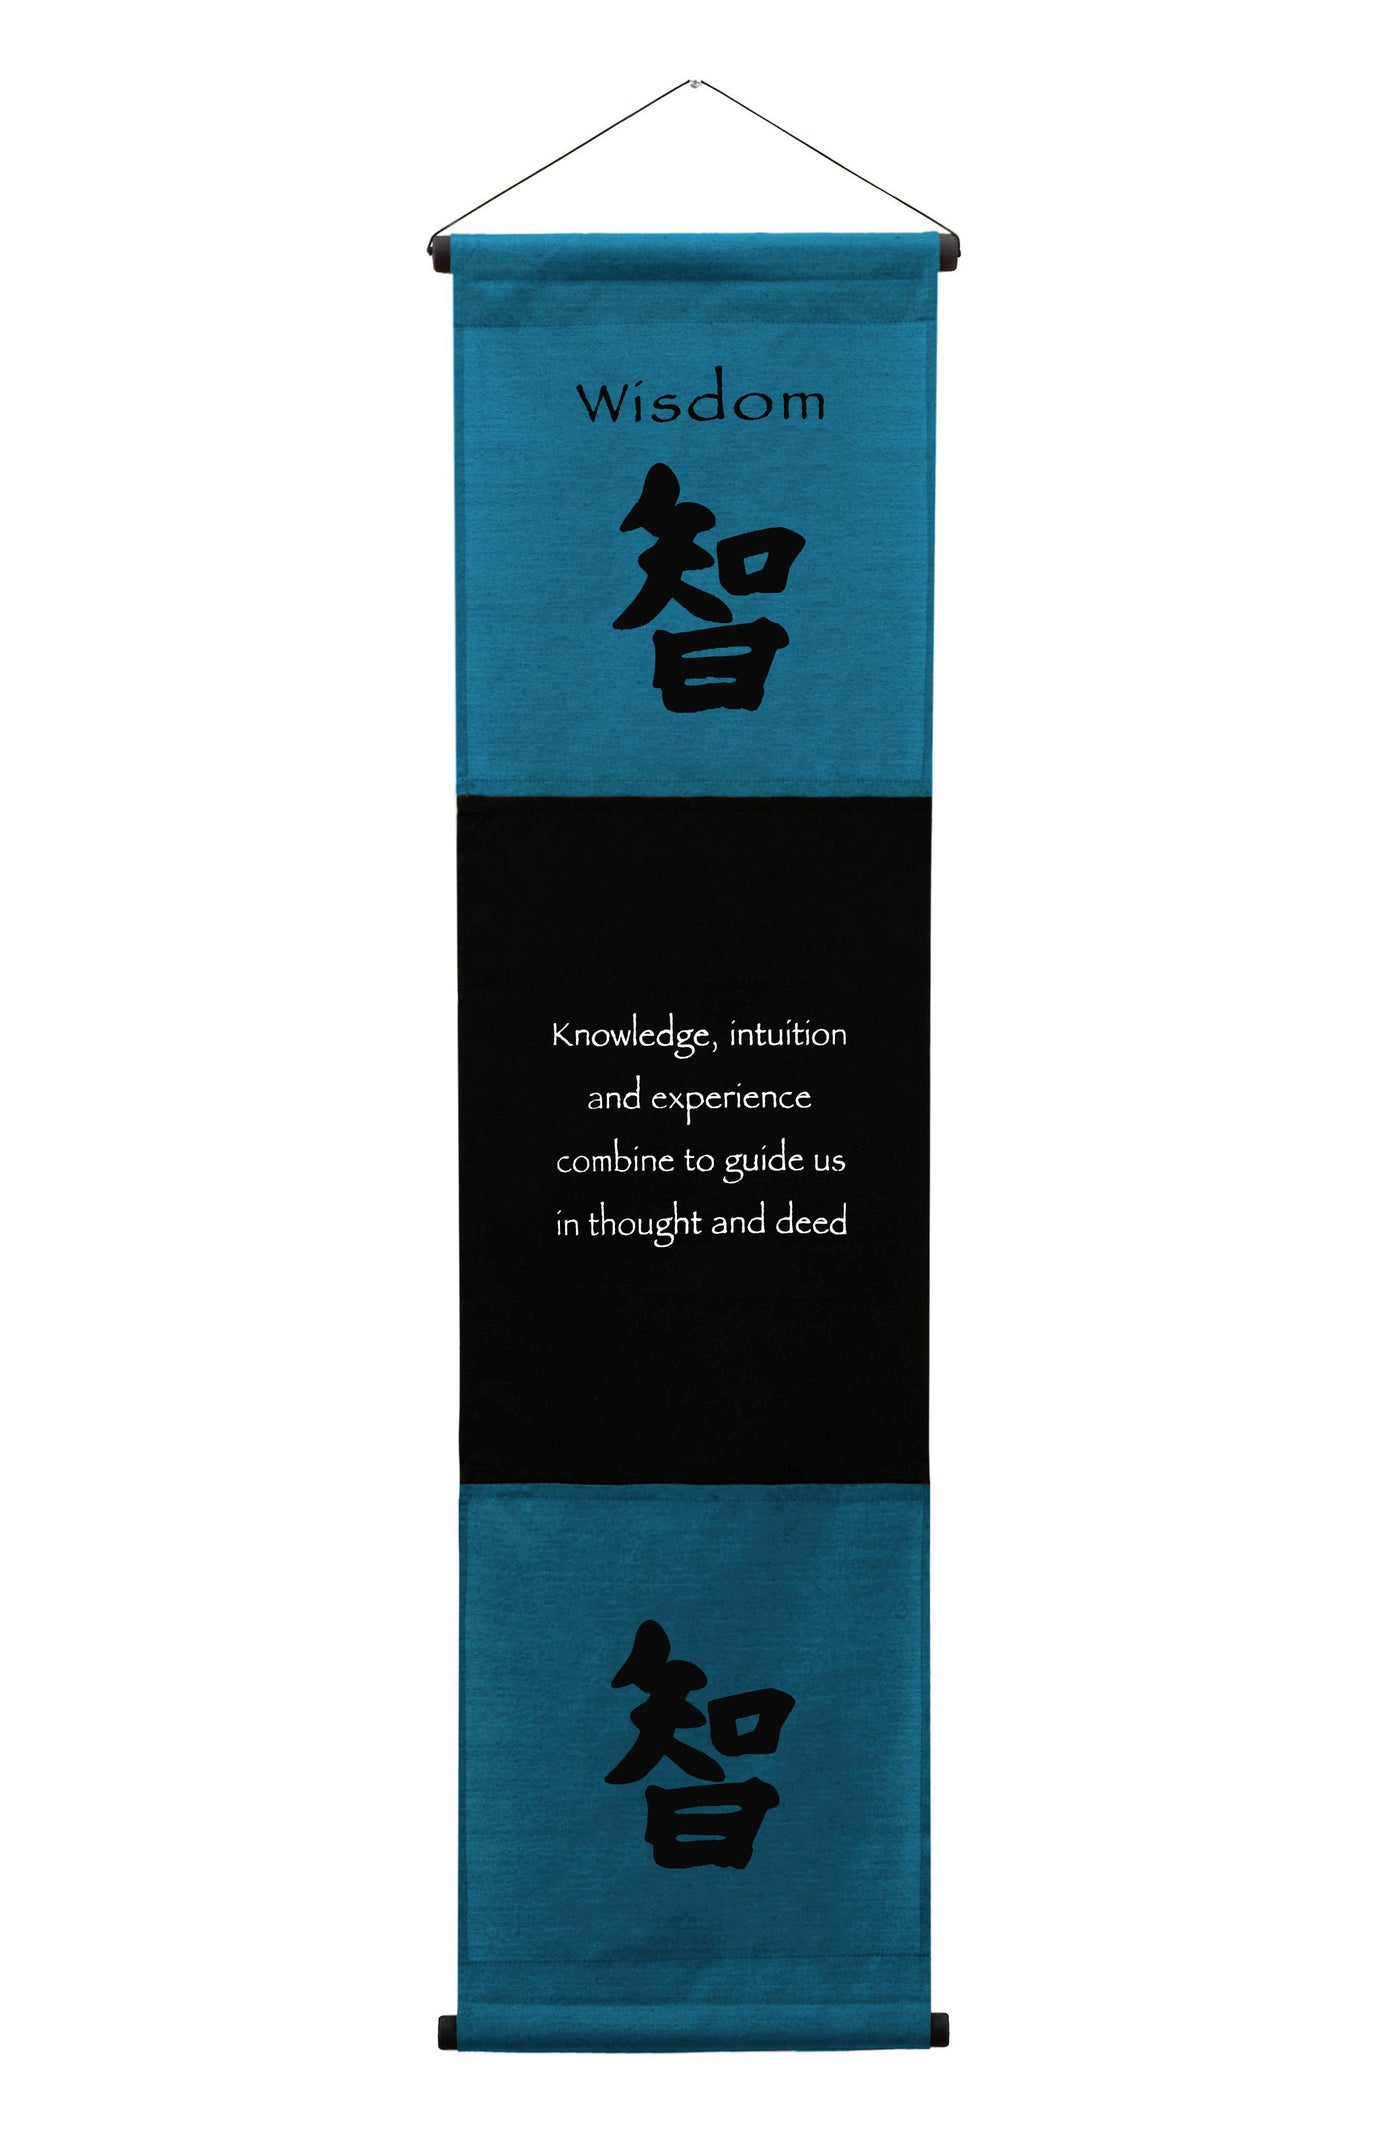 Inspirational Wall Decor "Wisdom" Banner Large, Inspiring Quote Wall Hanging Scroll, Affirmation Motivational Uplifting Art Decoration, Thought Saying Tapestry blue